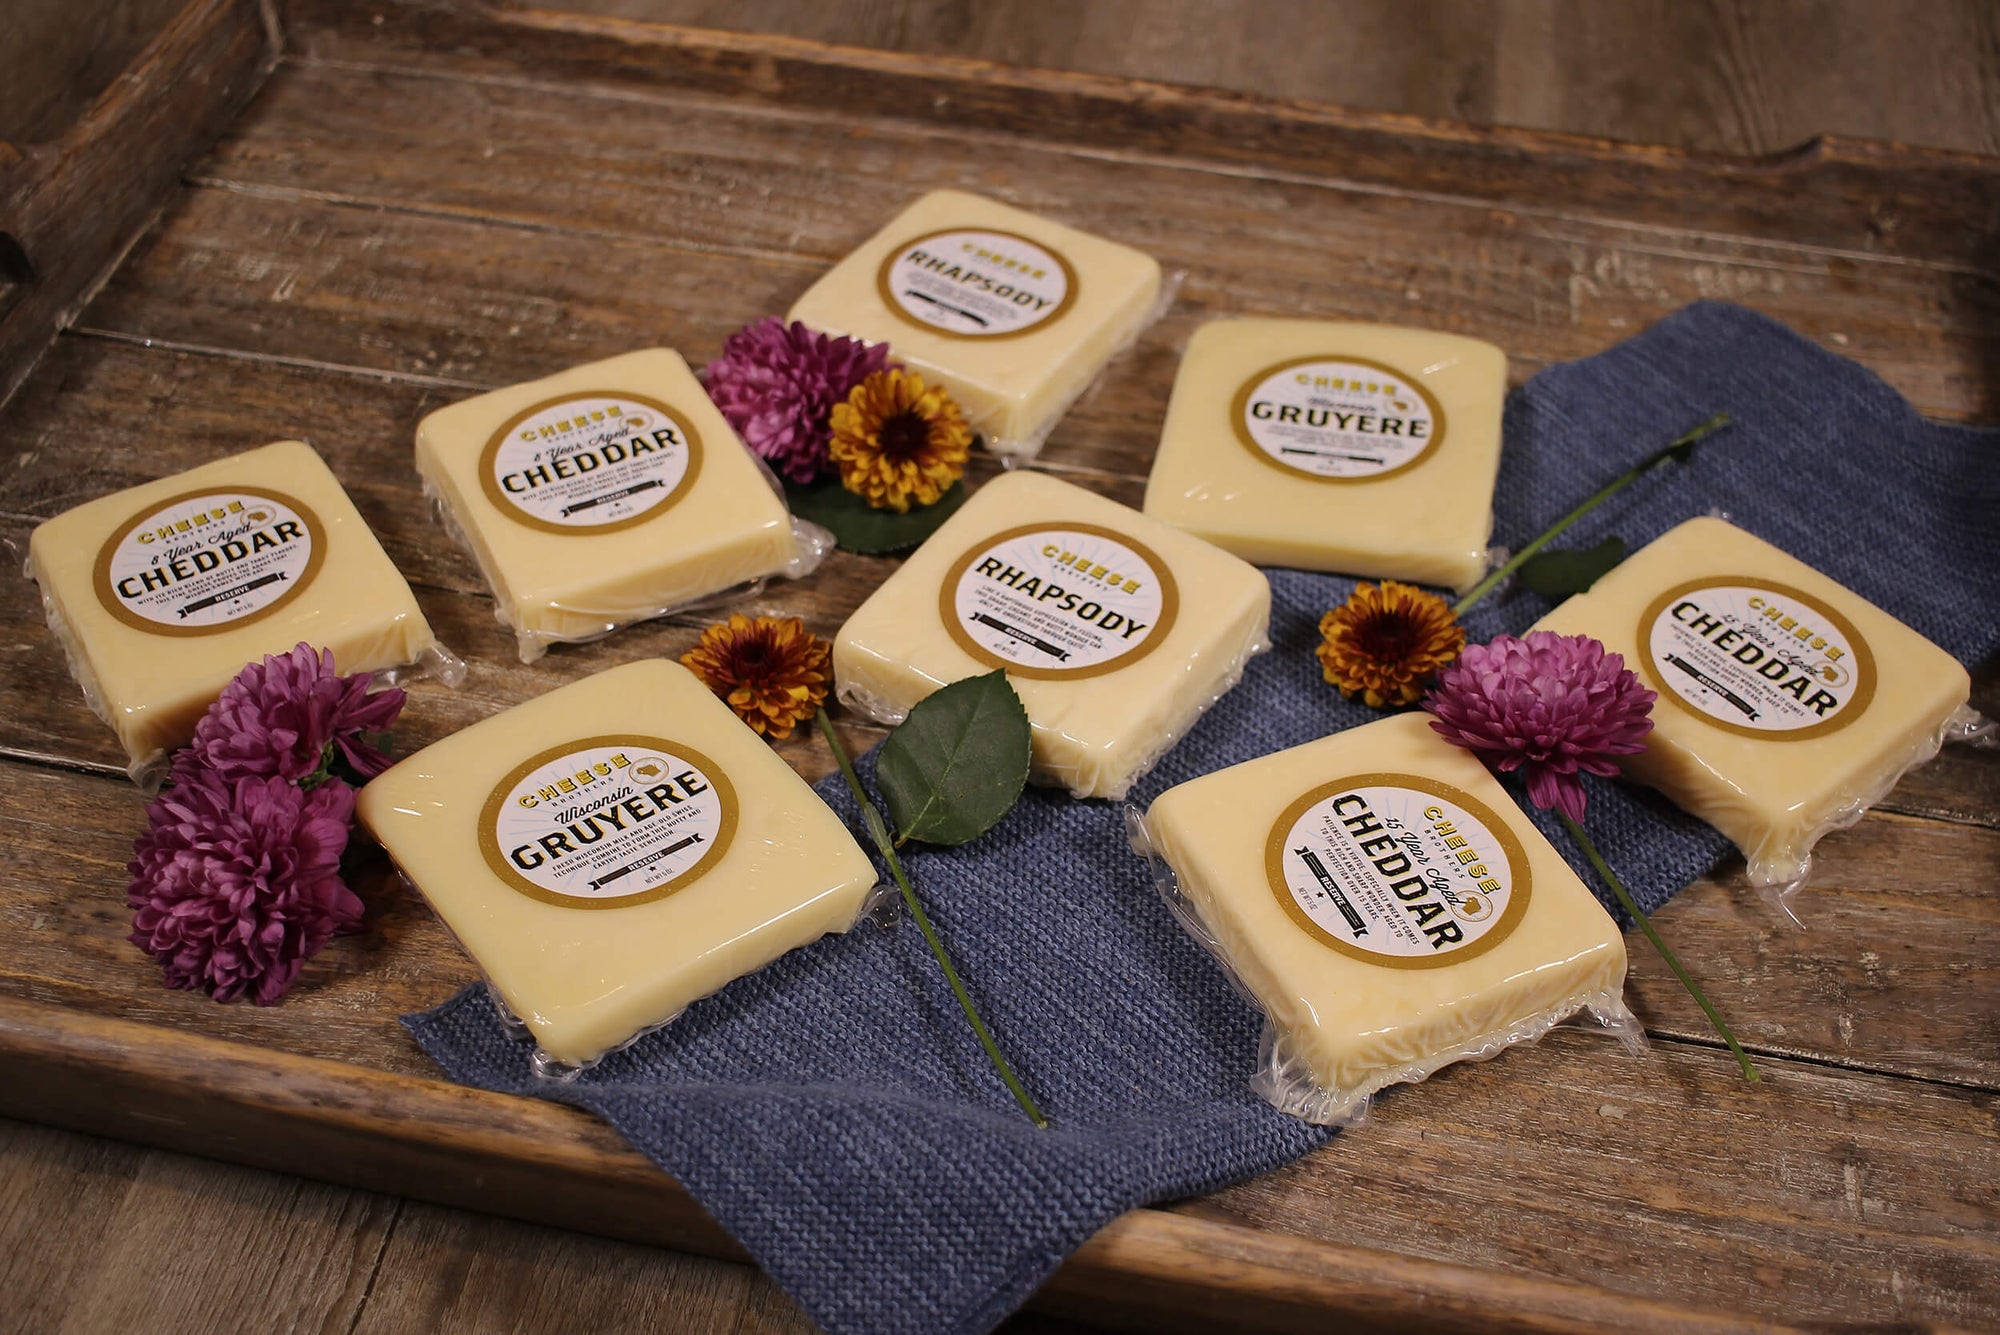 Cheese Brothers signature collection of artisan cheeses.